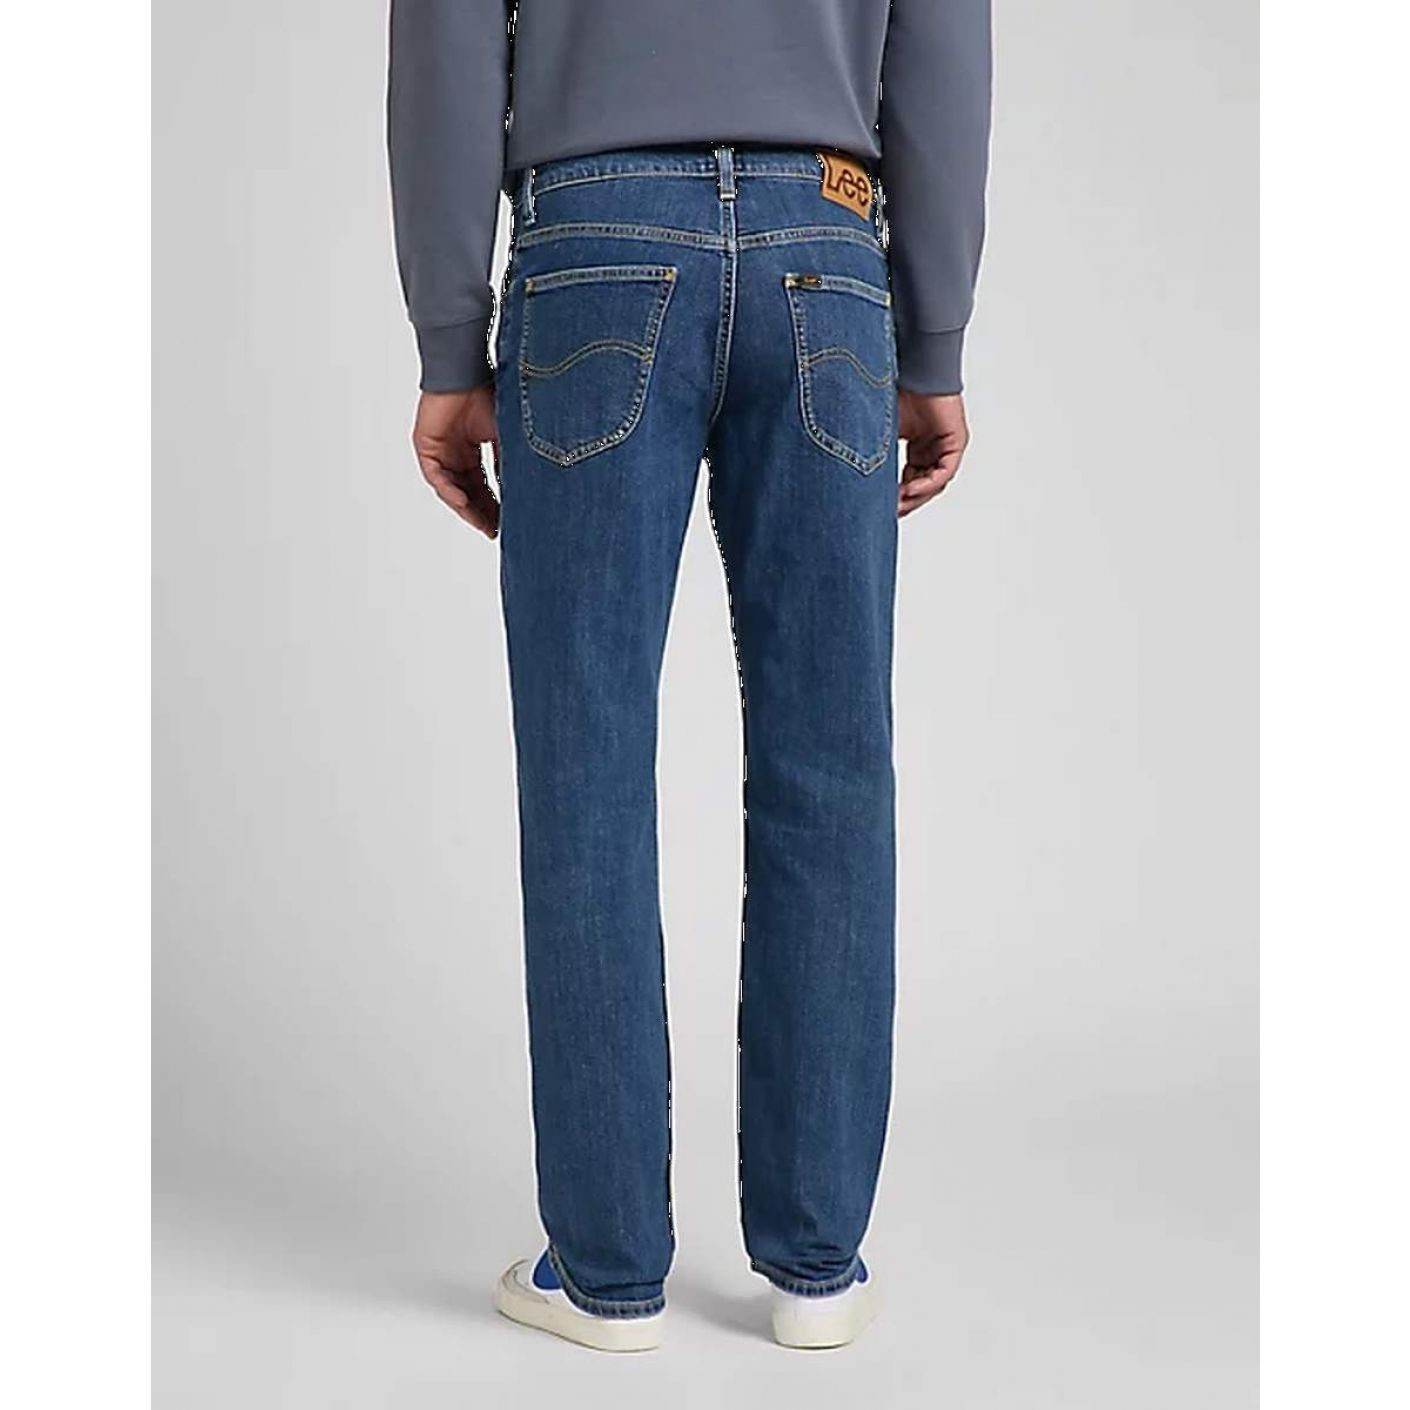 Lee Jeans Brooklyn Straight in Mid Stone Wash